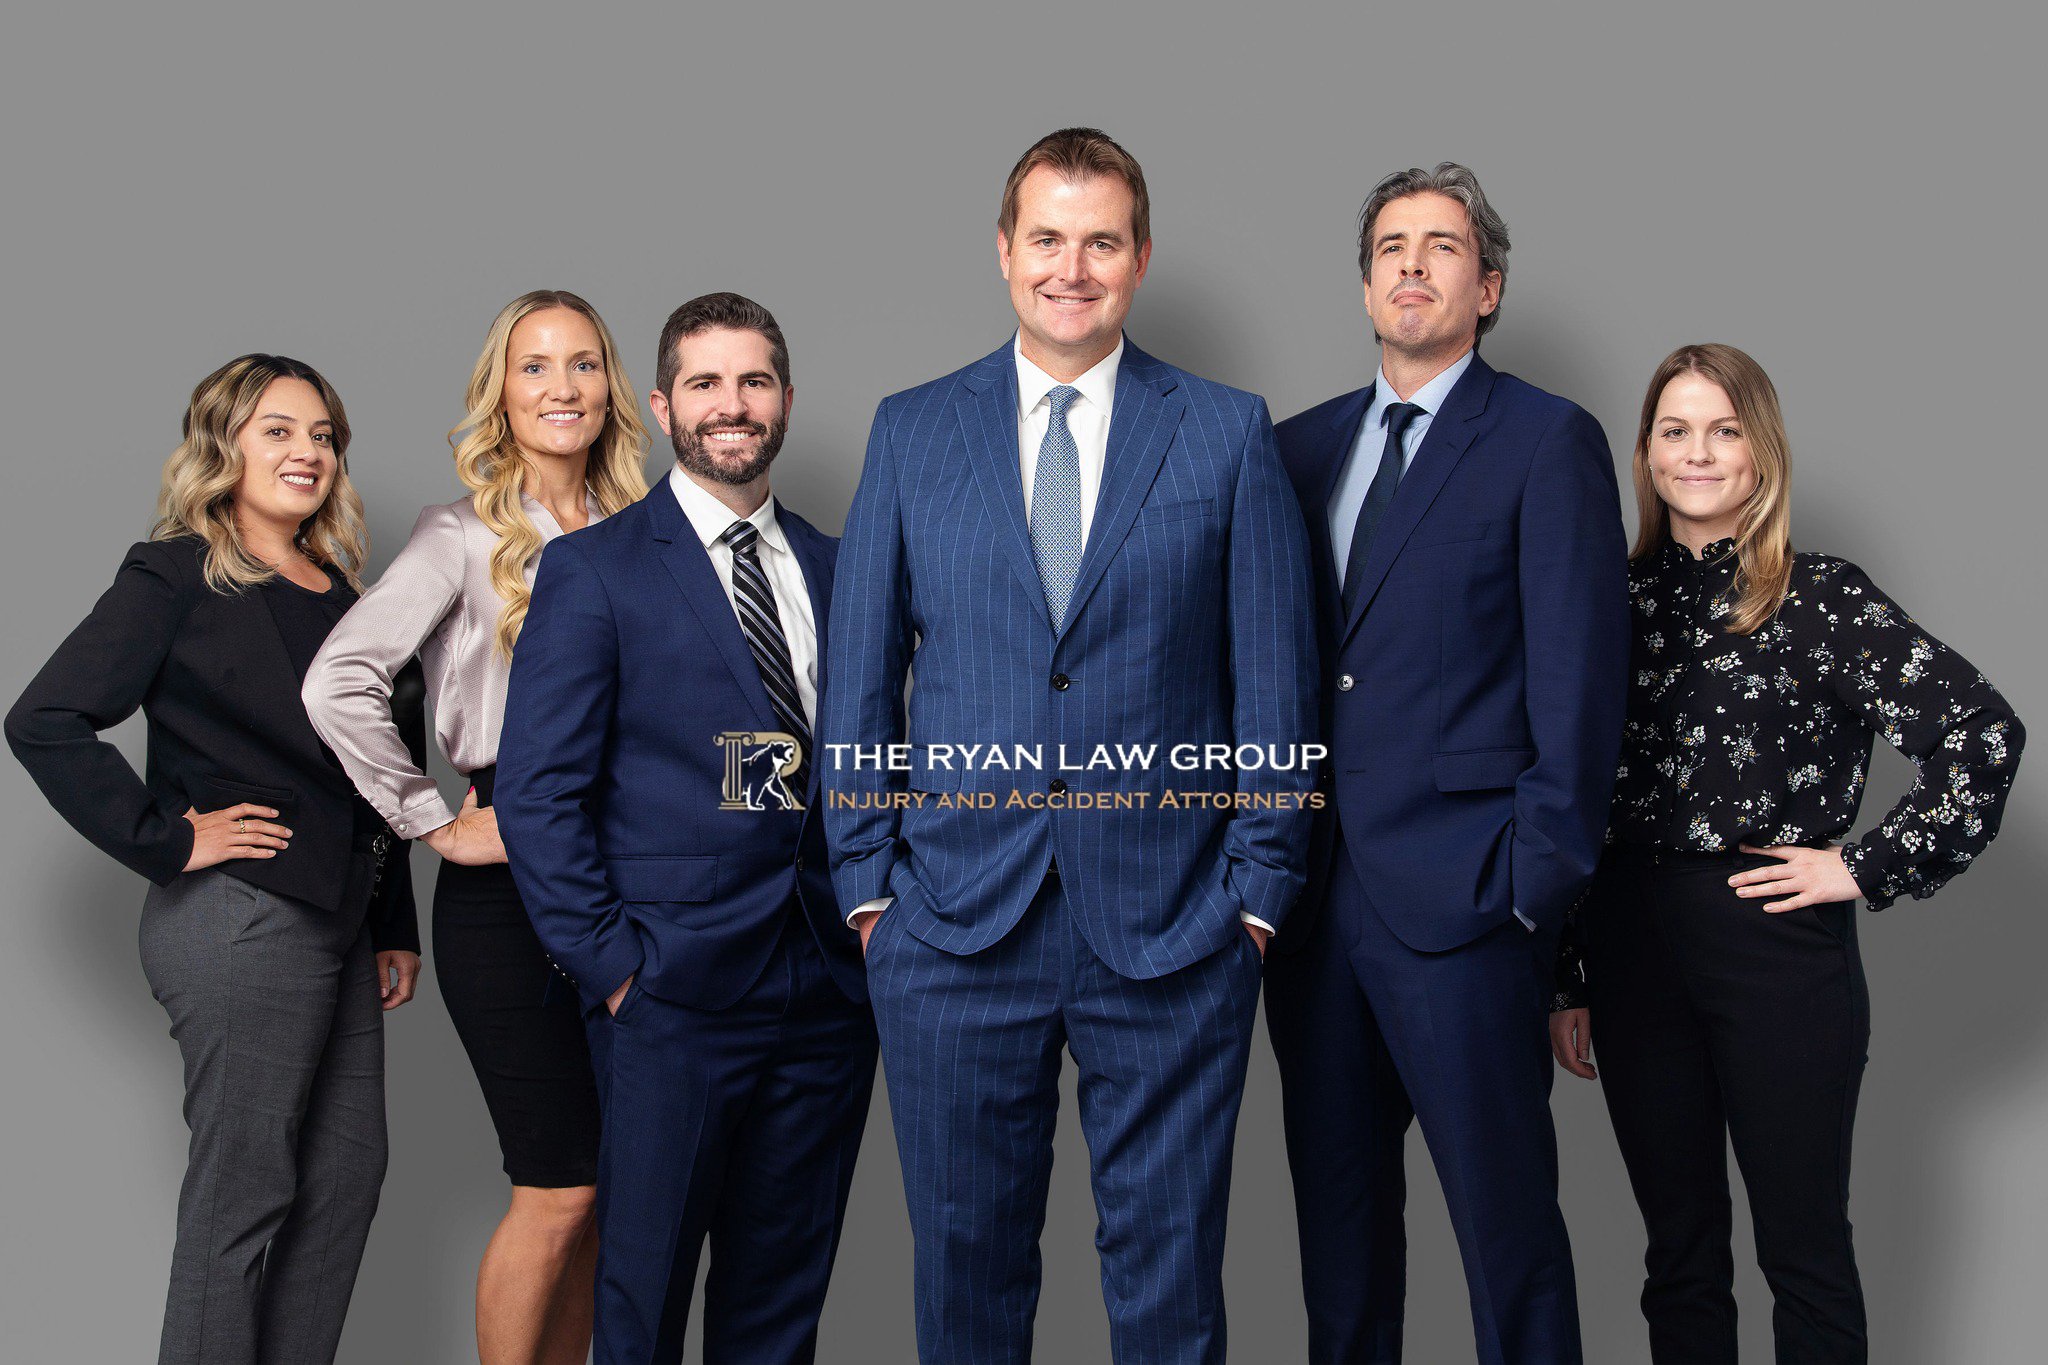 The Ryan Law Group Injury and Accident Attorneys cover